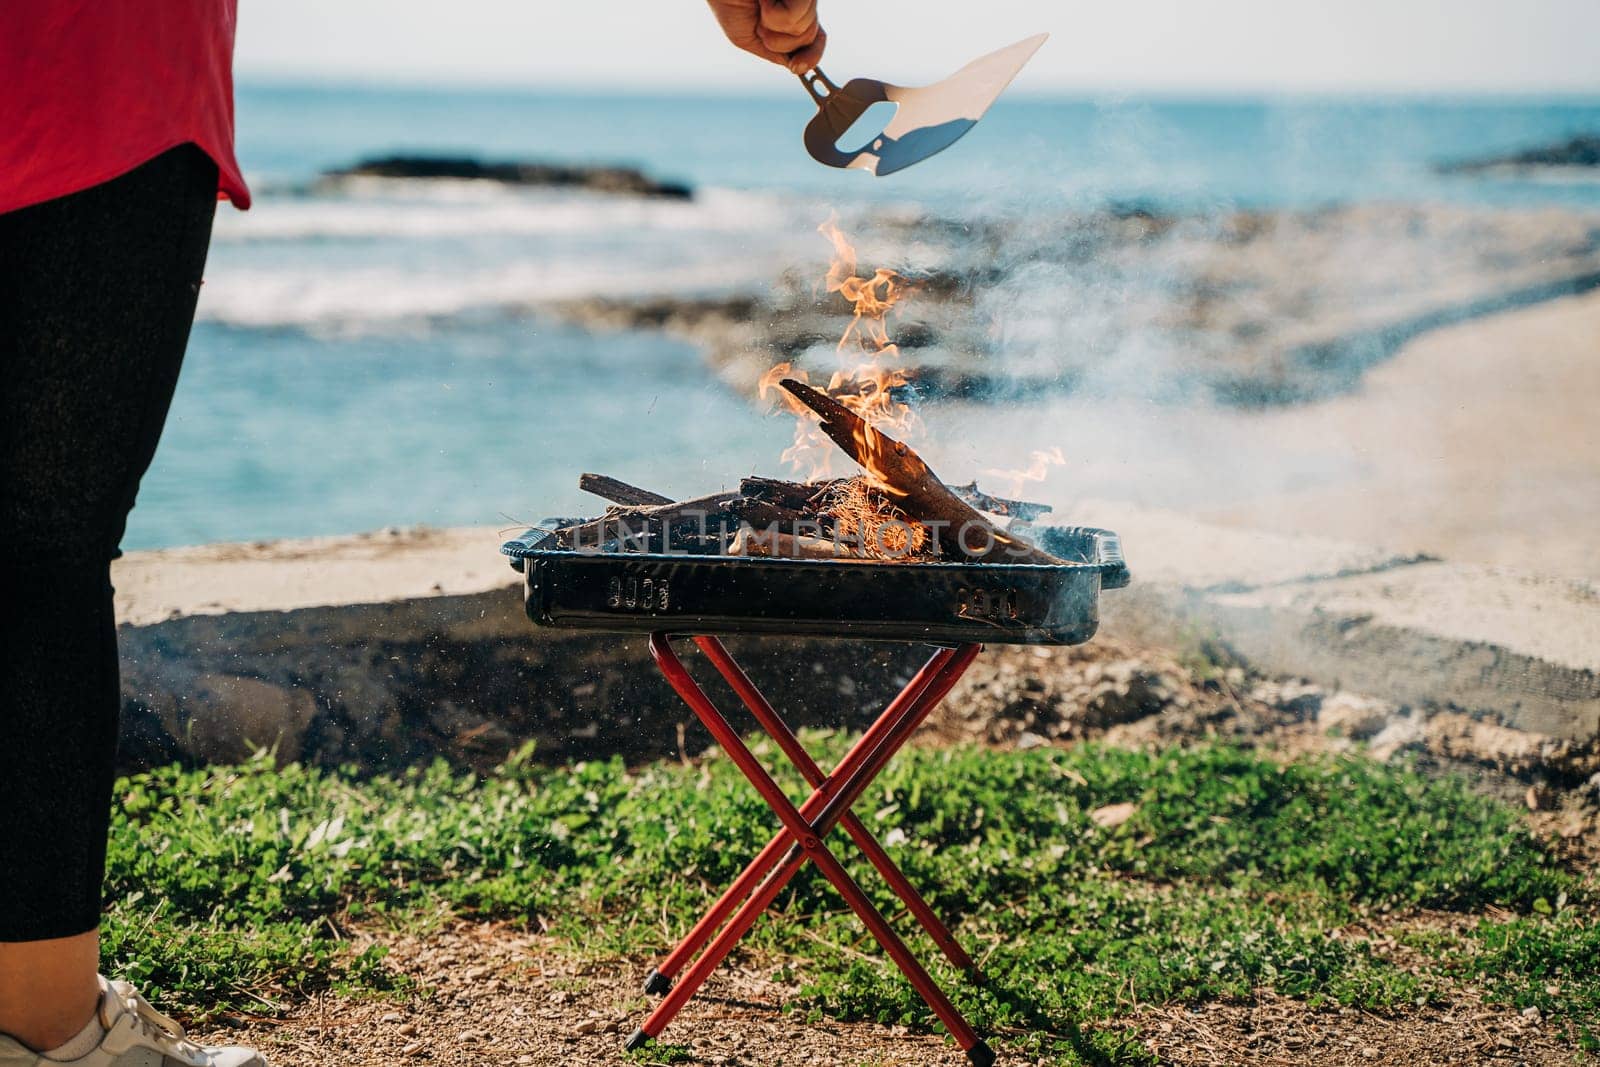 Woman making Barbecue grill in nature forest camping park with sea on background.